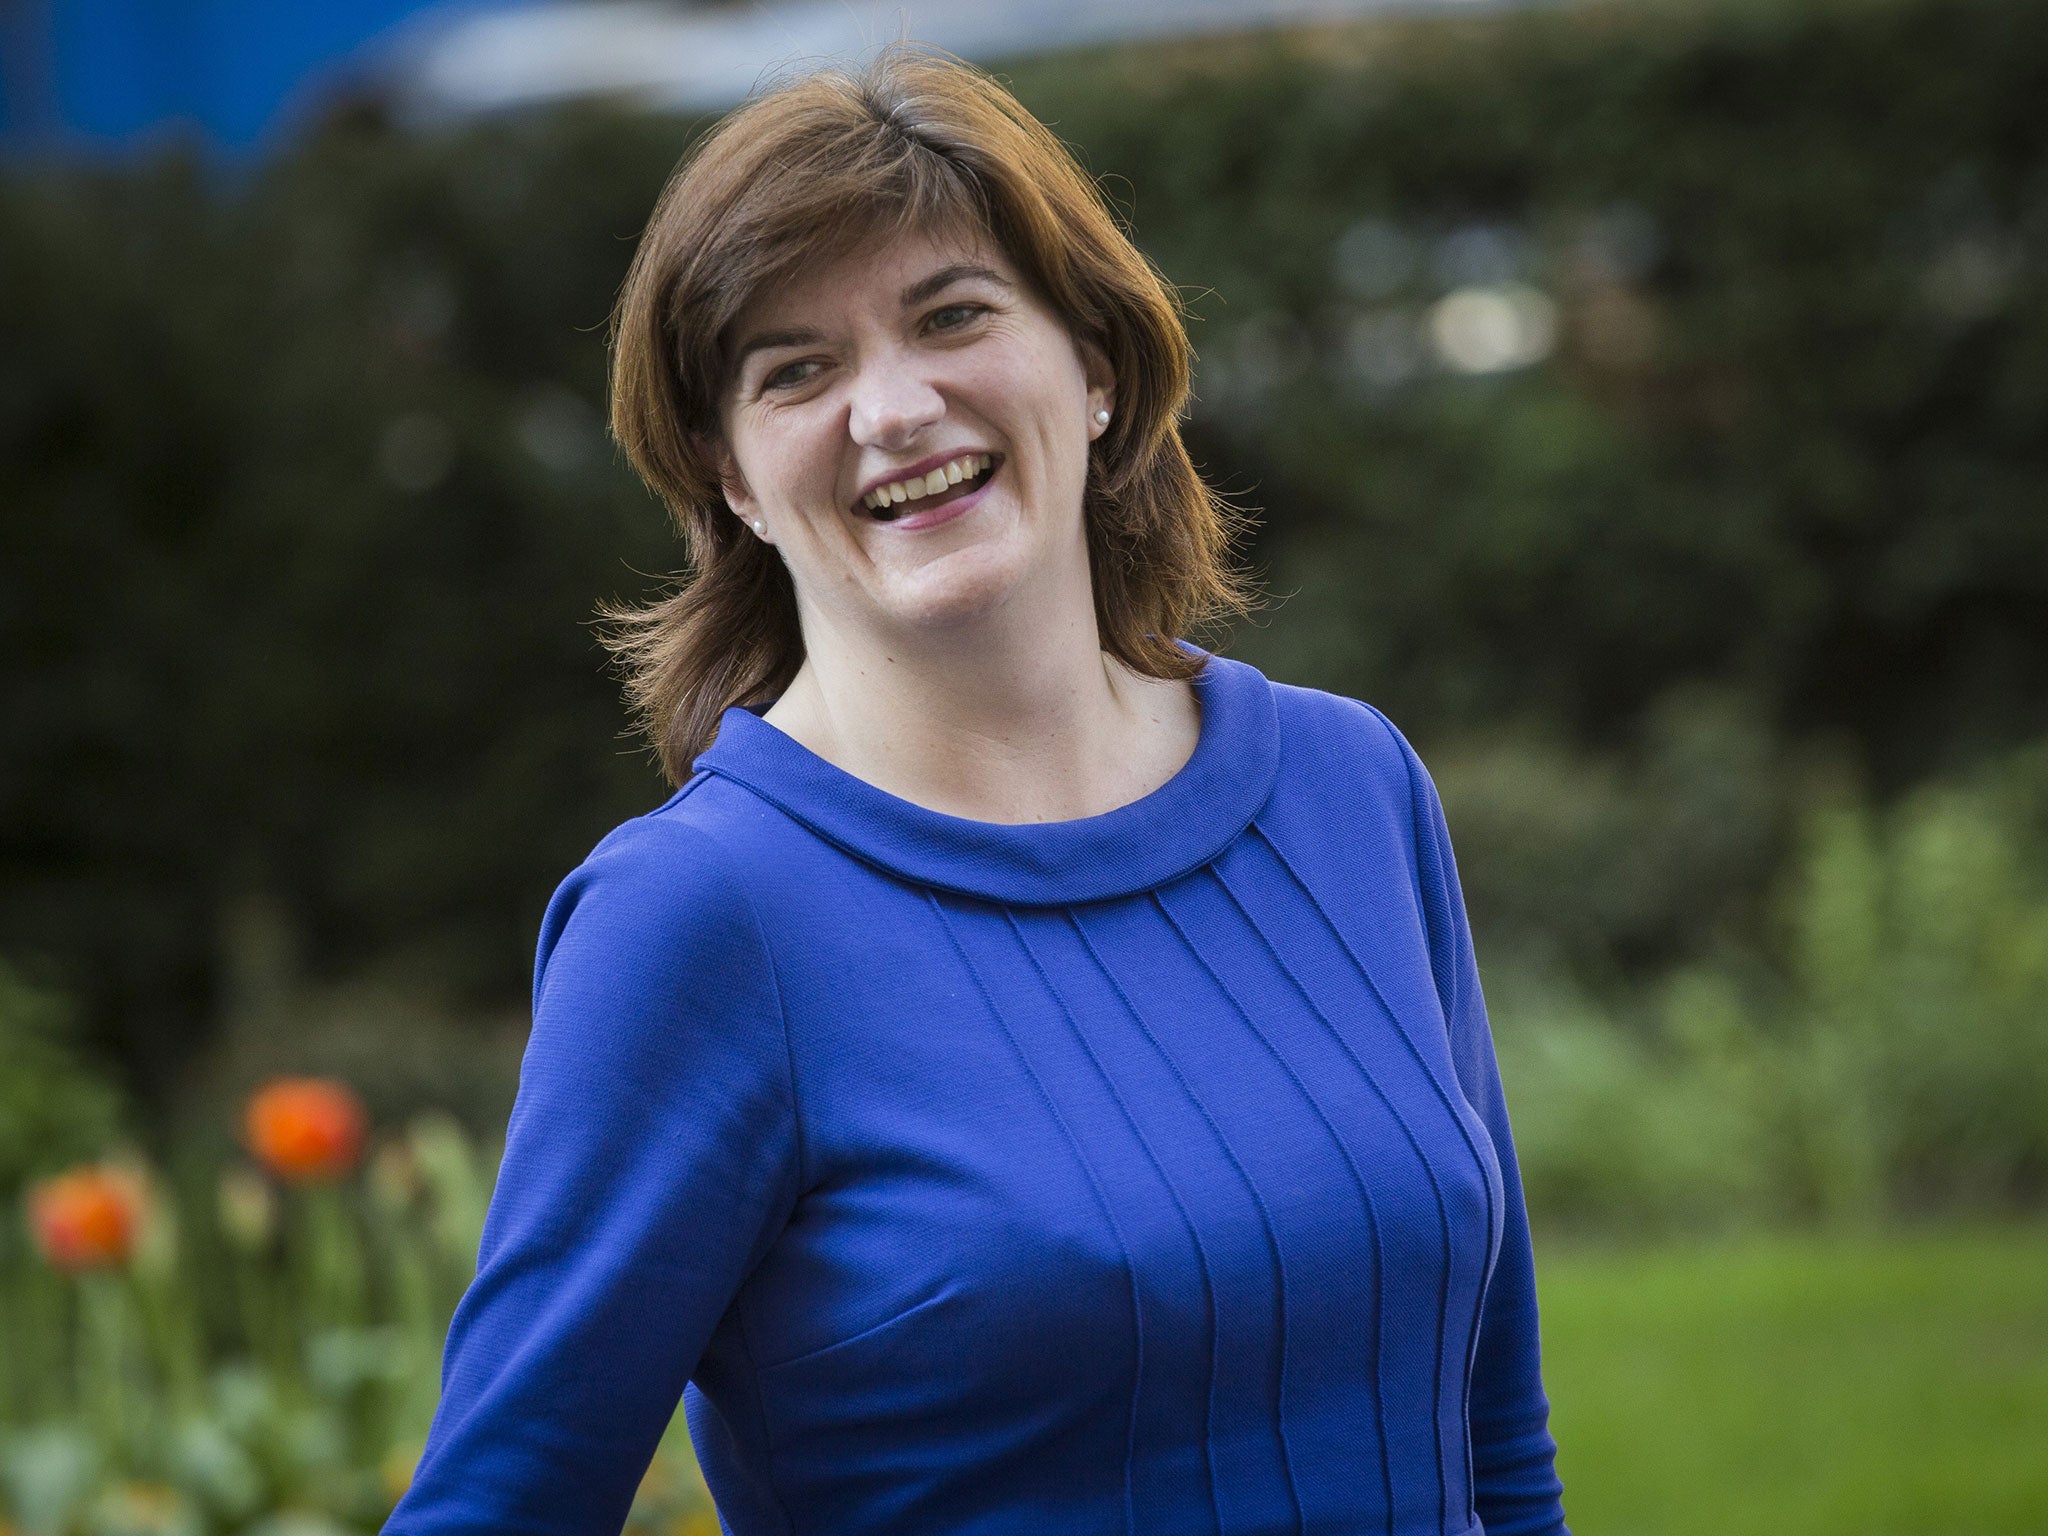 Nicky Morgan, a former corporate lawyer